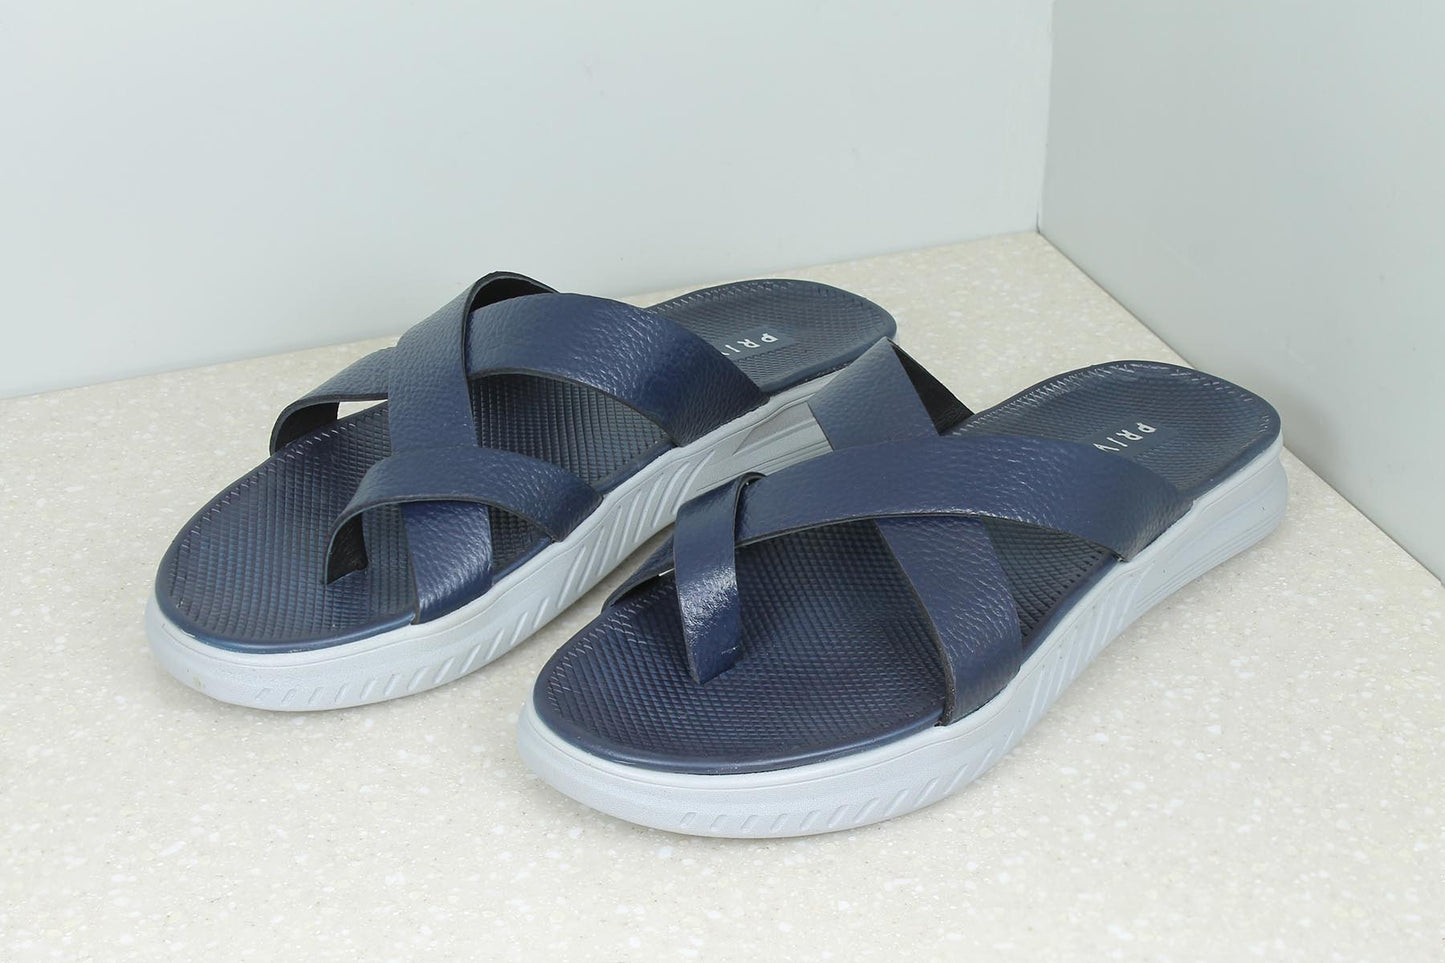 THONG CASUAL SLIPPER-BLUE-Men's Slippers-Inc5 Shoes